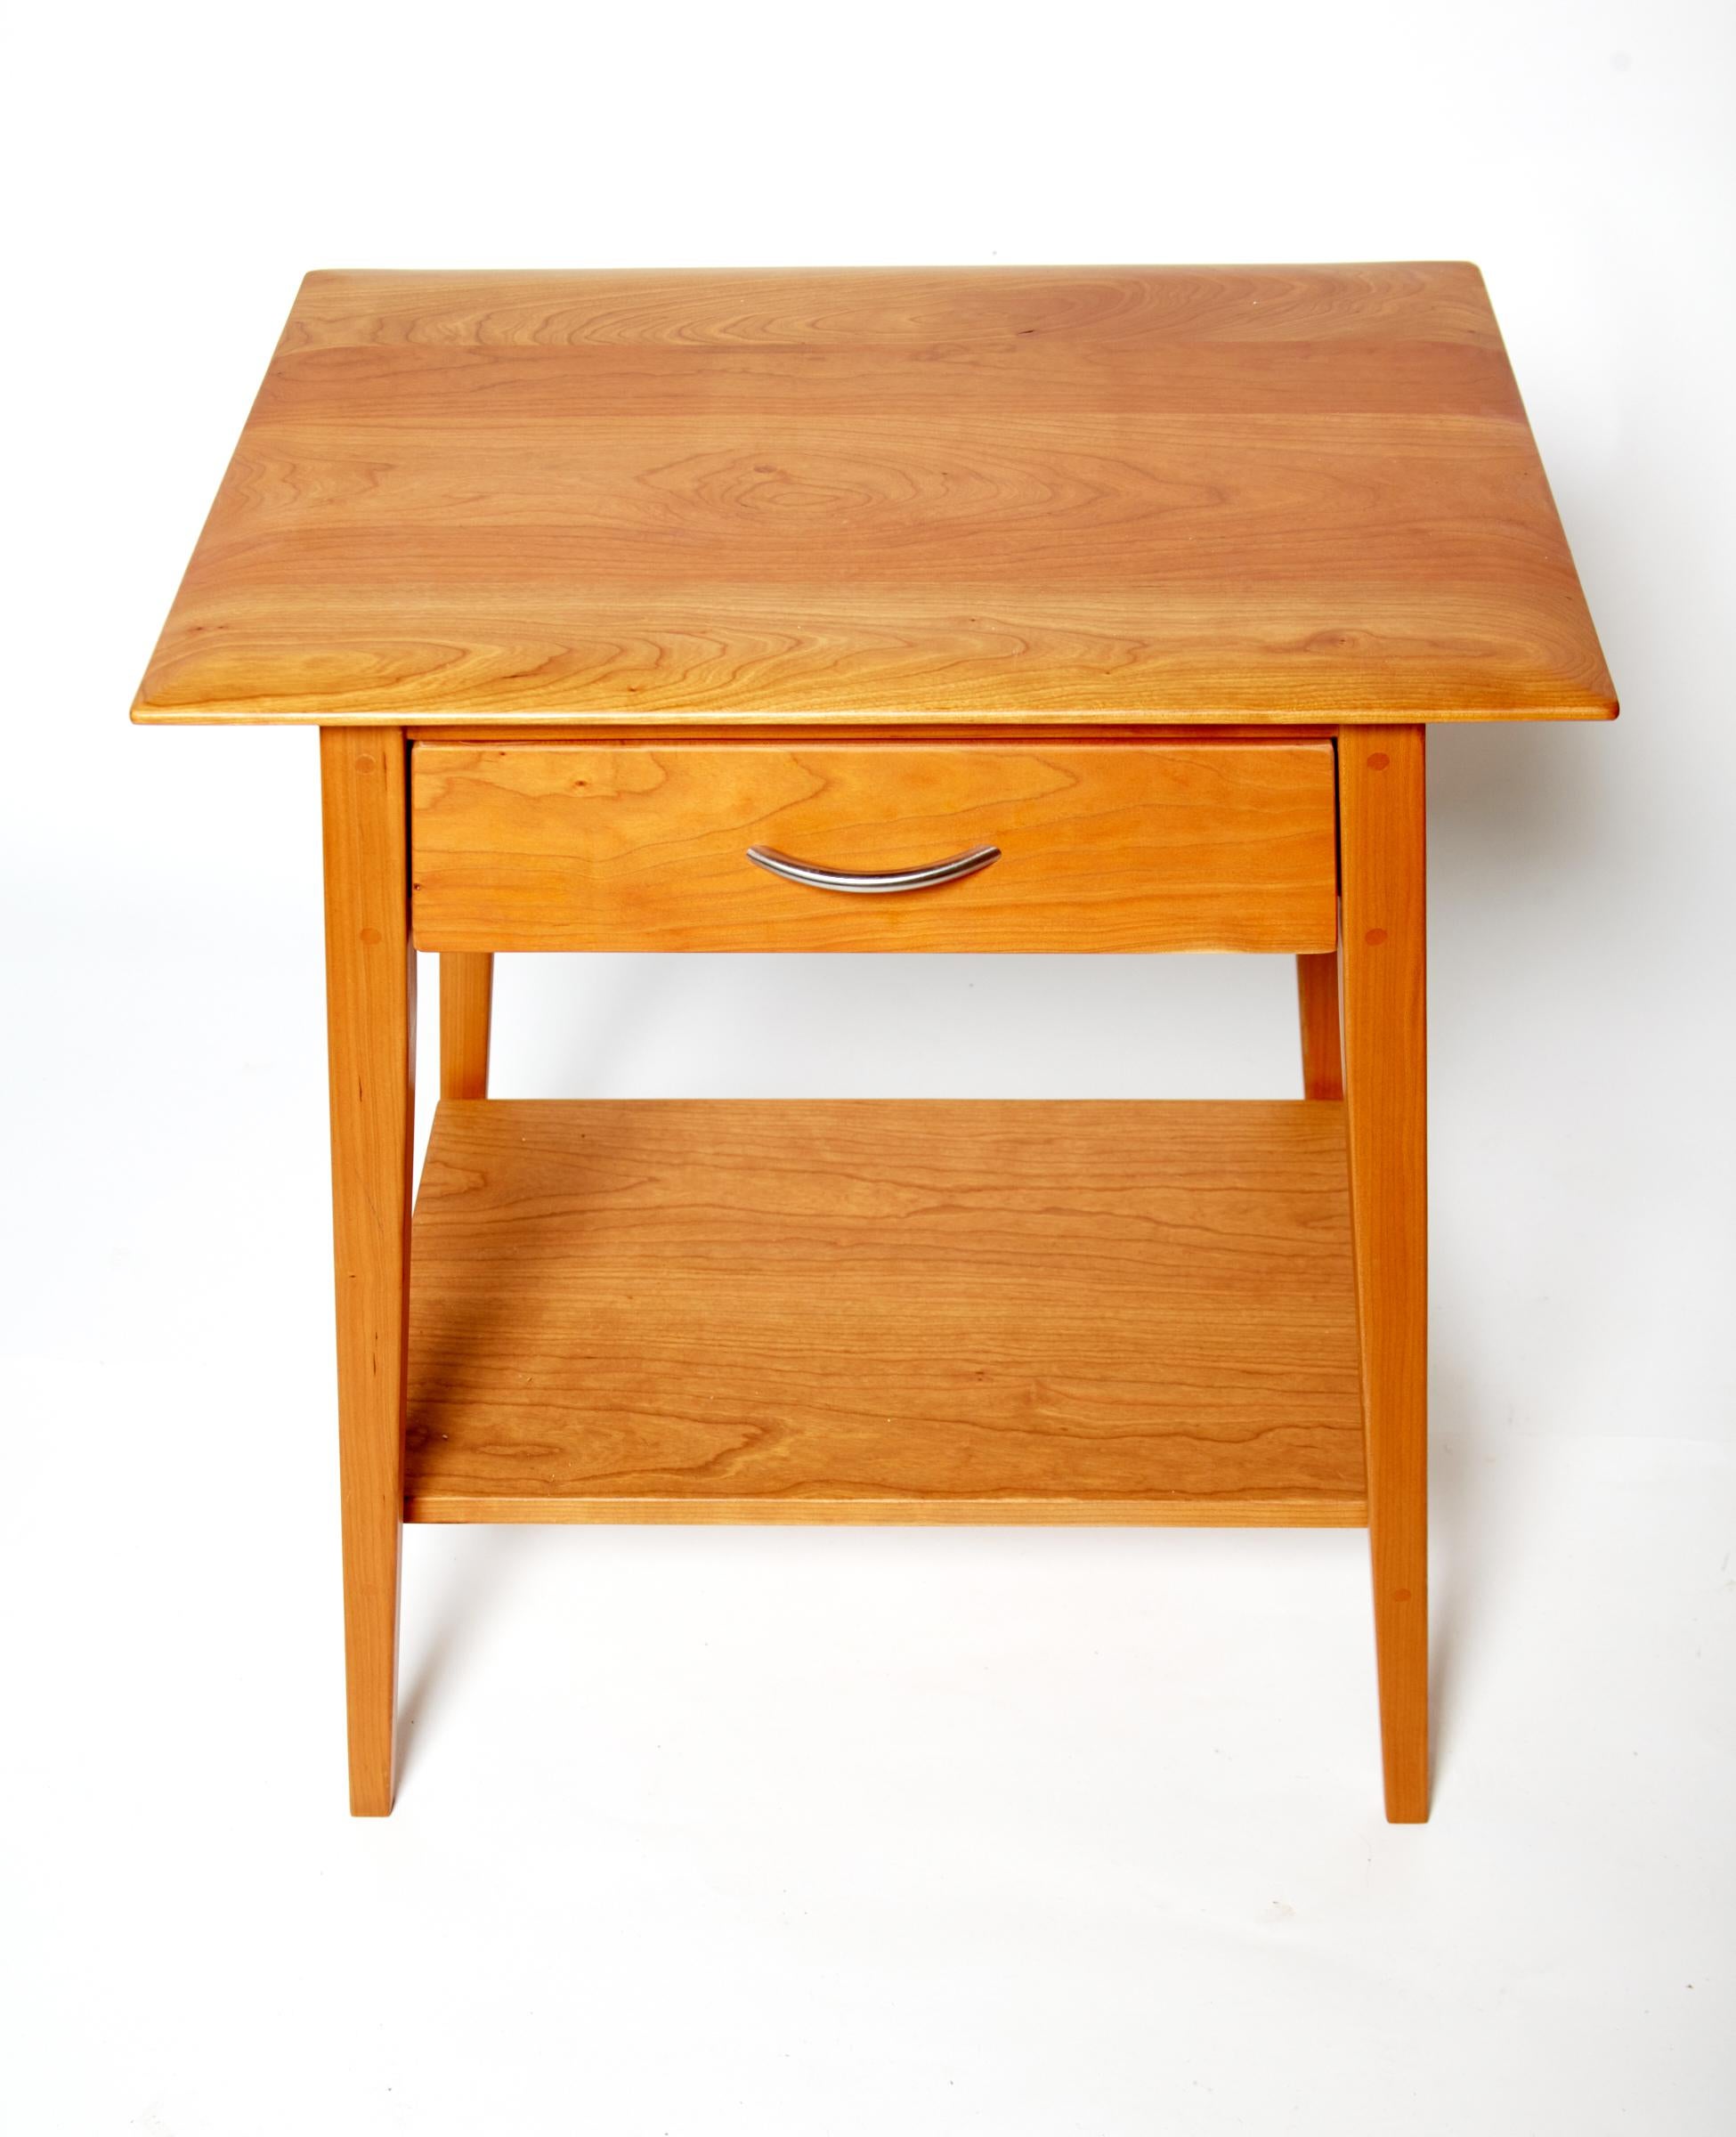 Hand-Crafted Pair of Pompanoosuc Mills Cherry End Tables, Handcrafted in Vermont